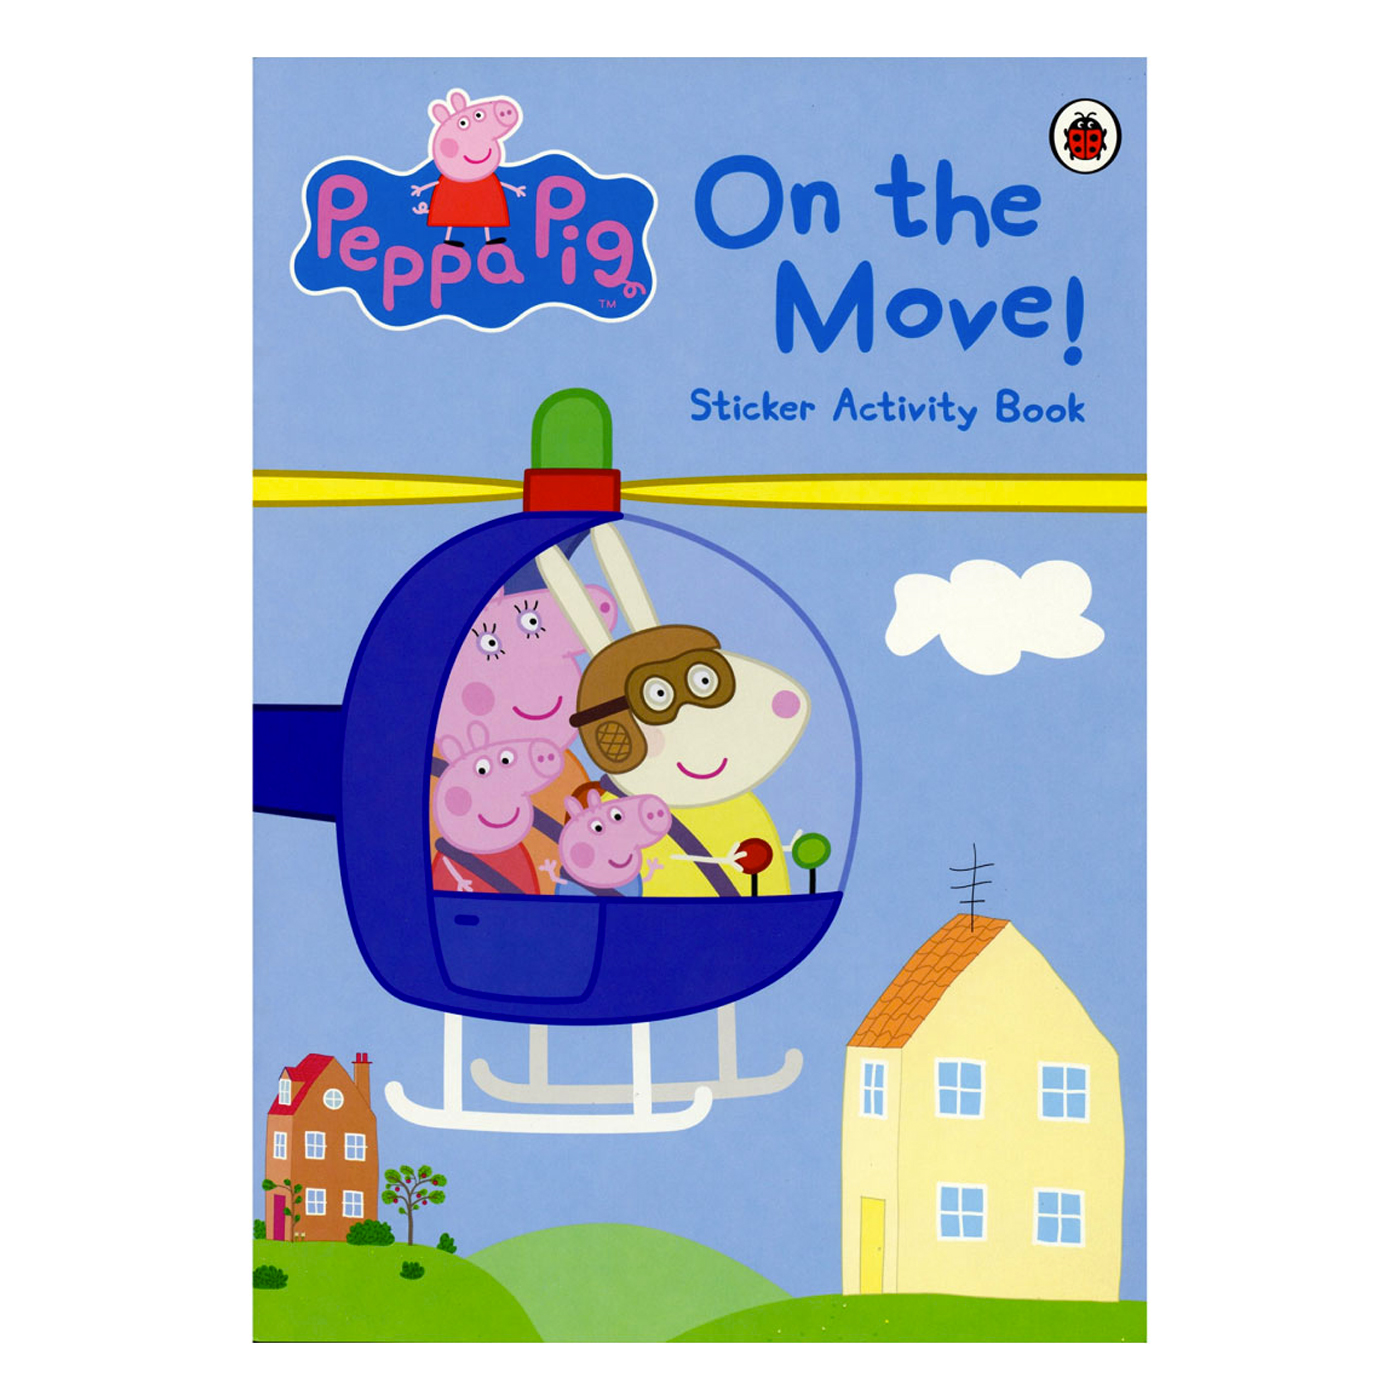  Peppa Pig: On the Move! Sticker Activity